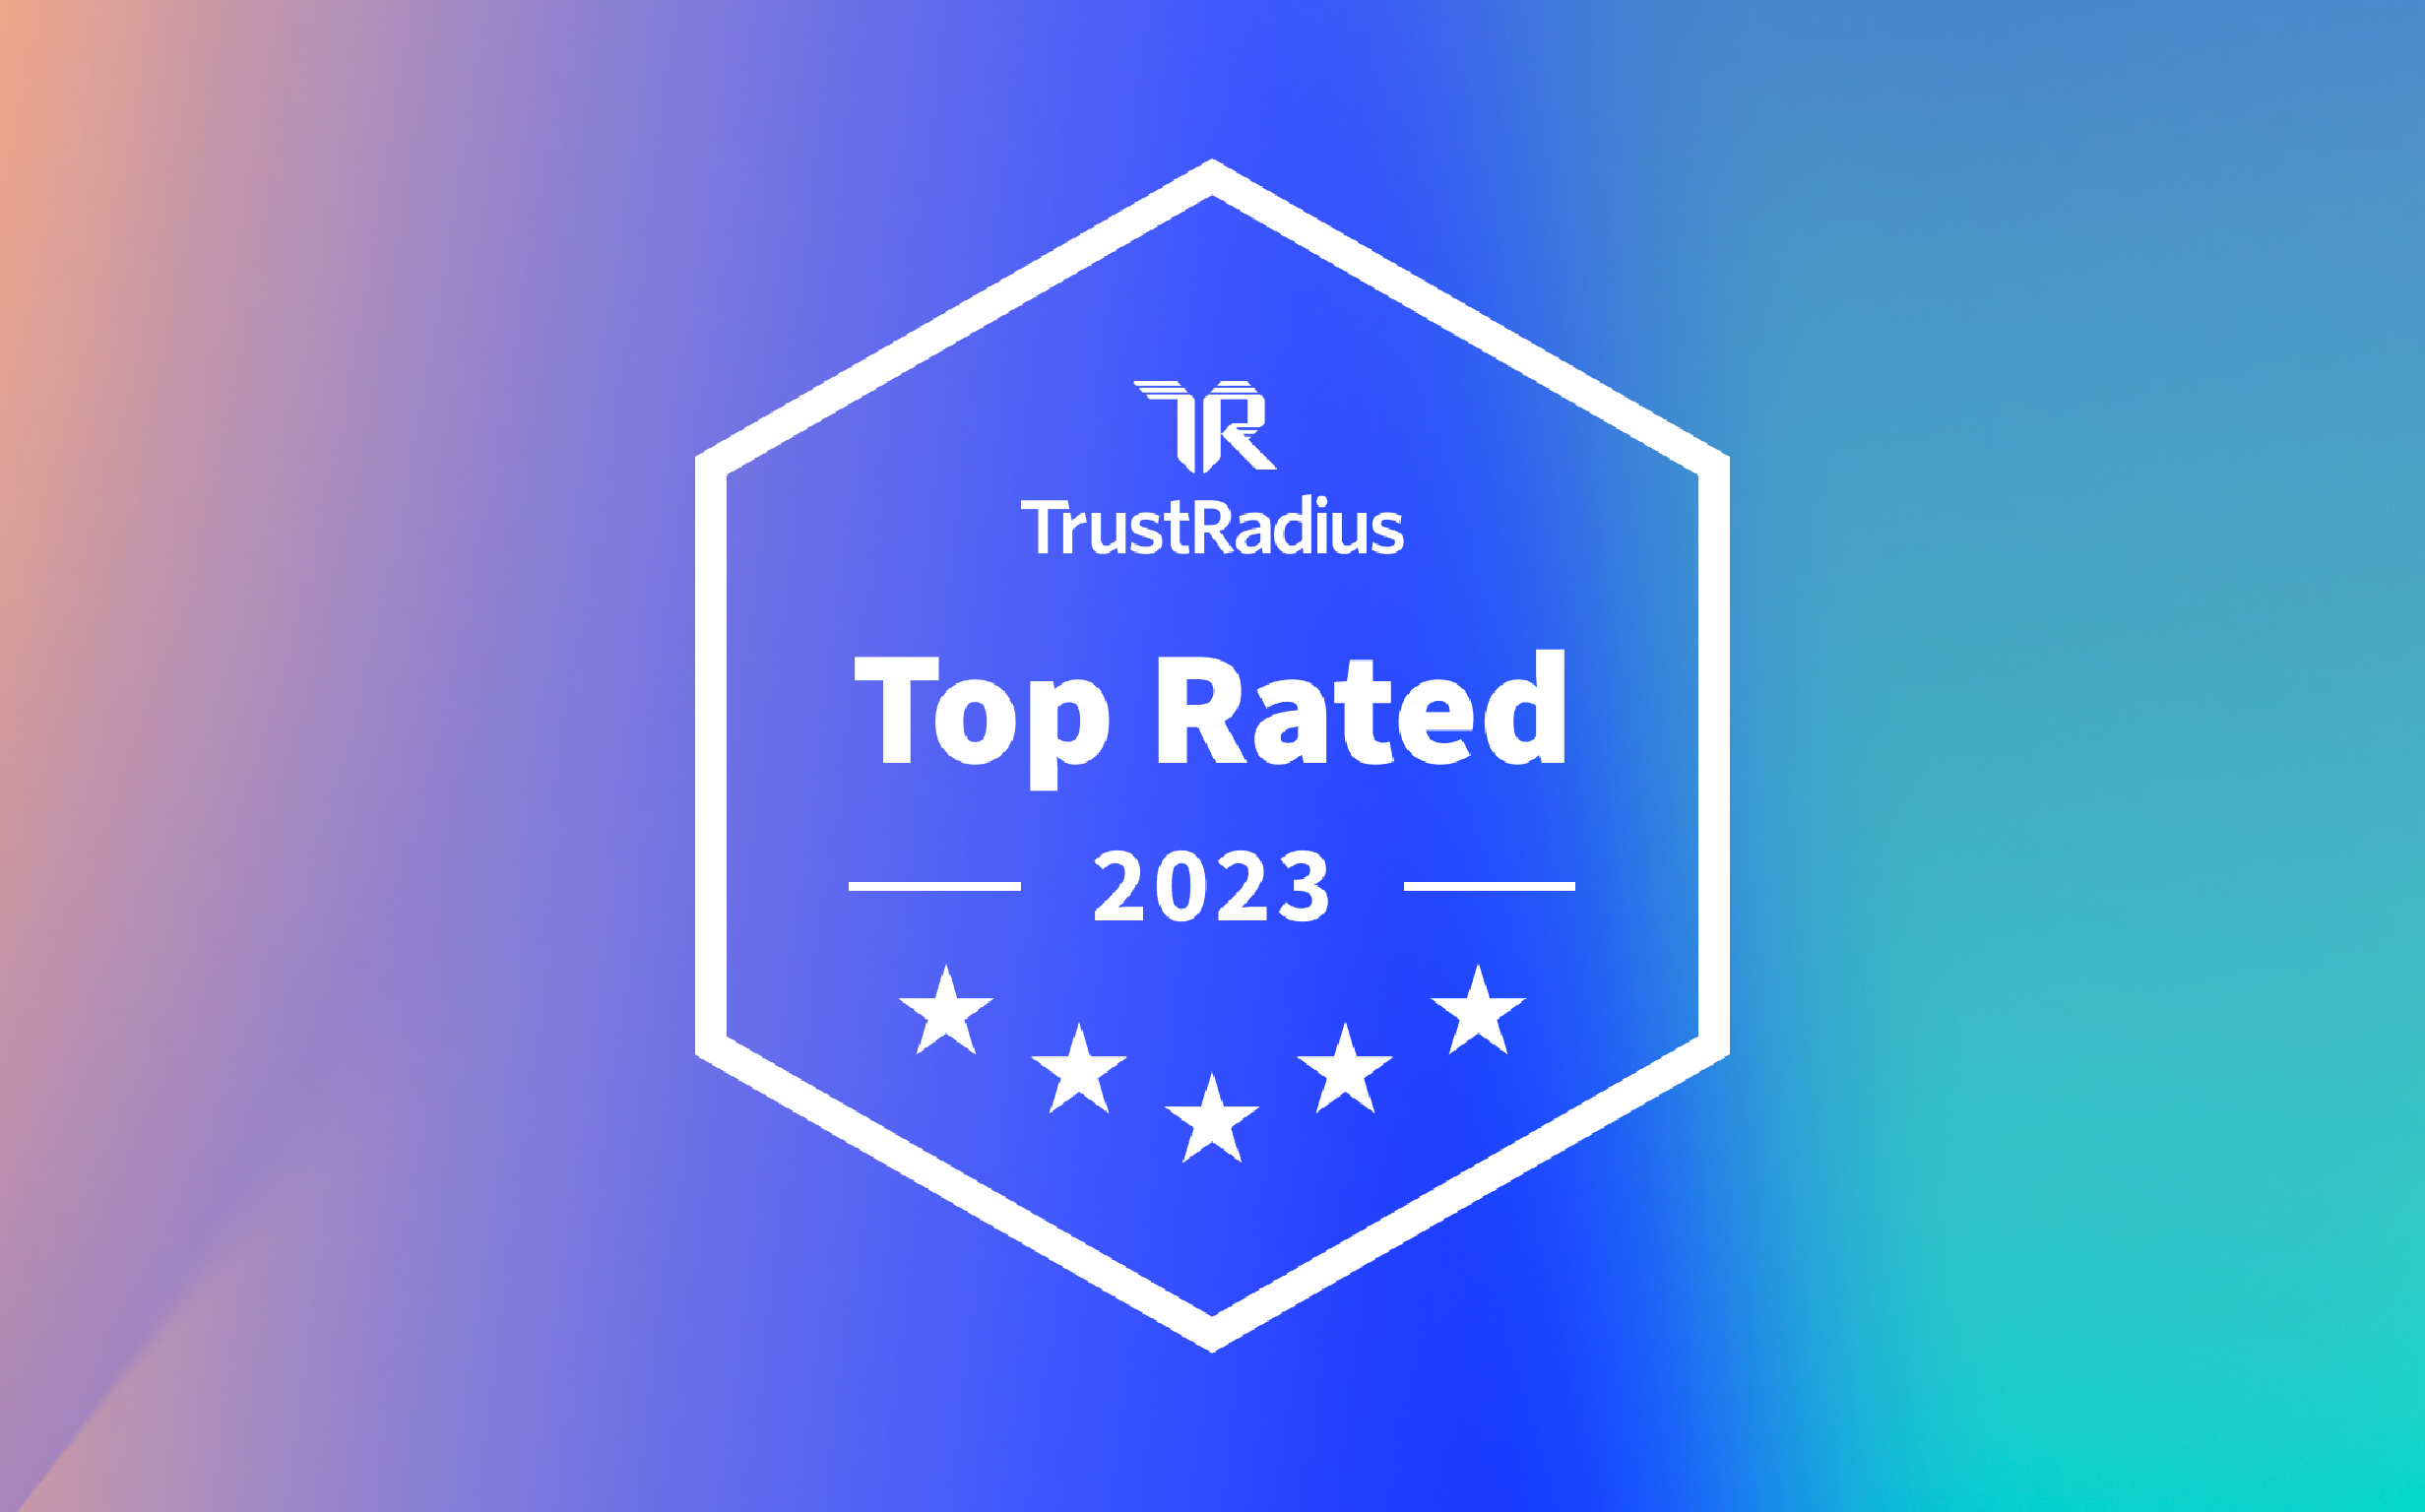 LogicMonitor earns multiple Top Rated awards from TrustRadius 